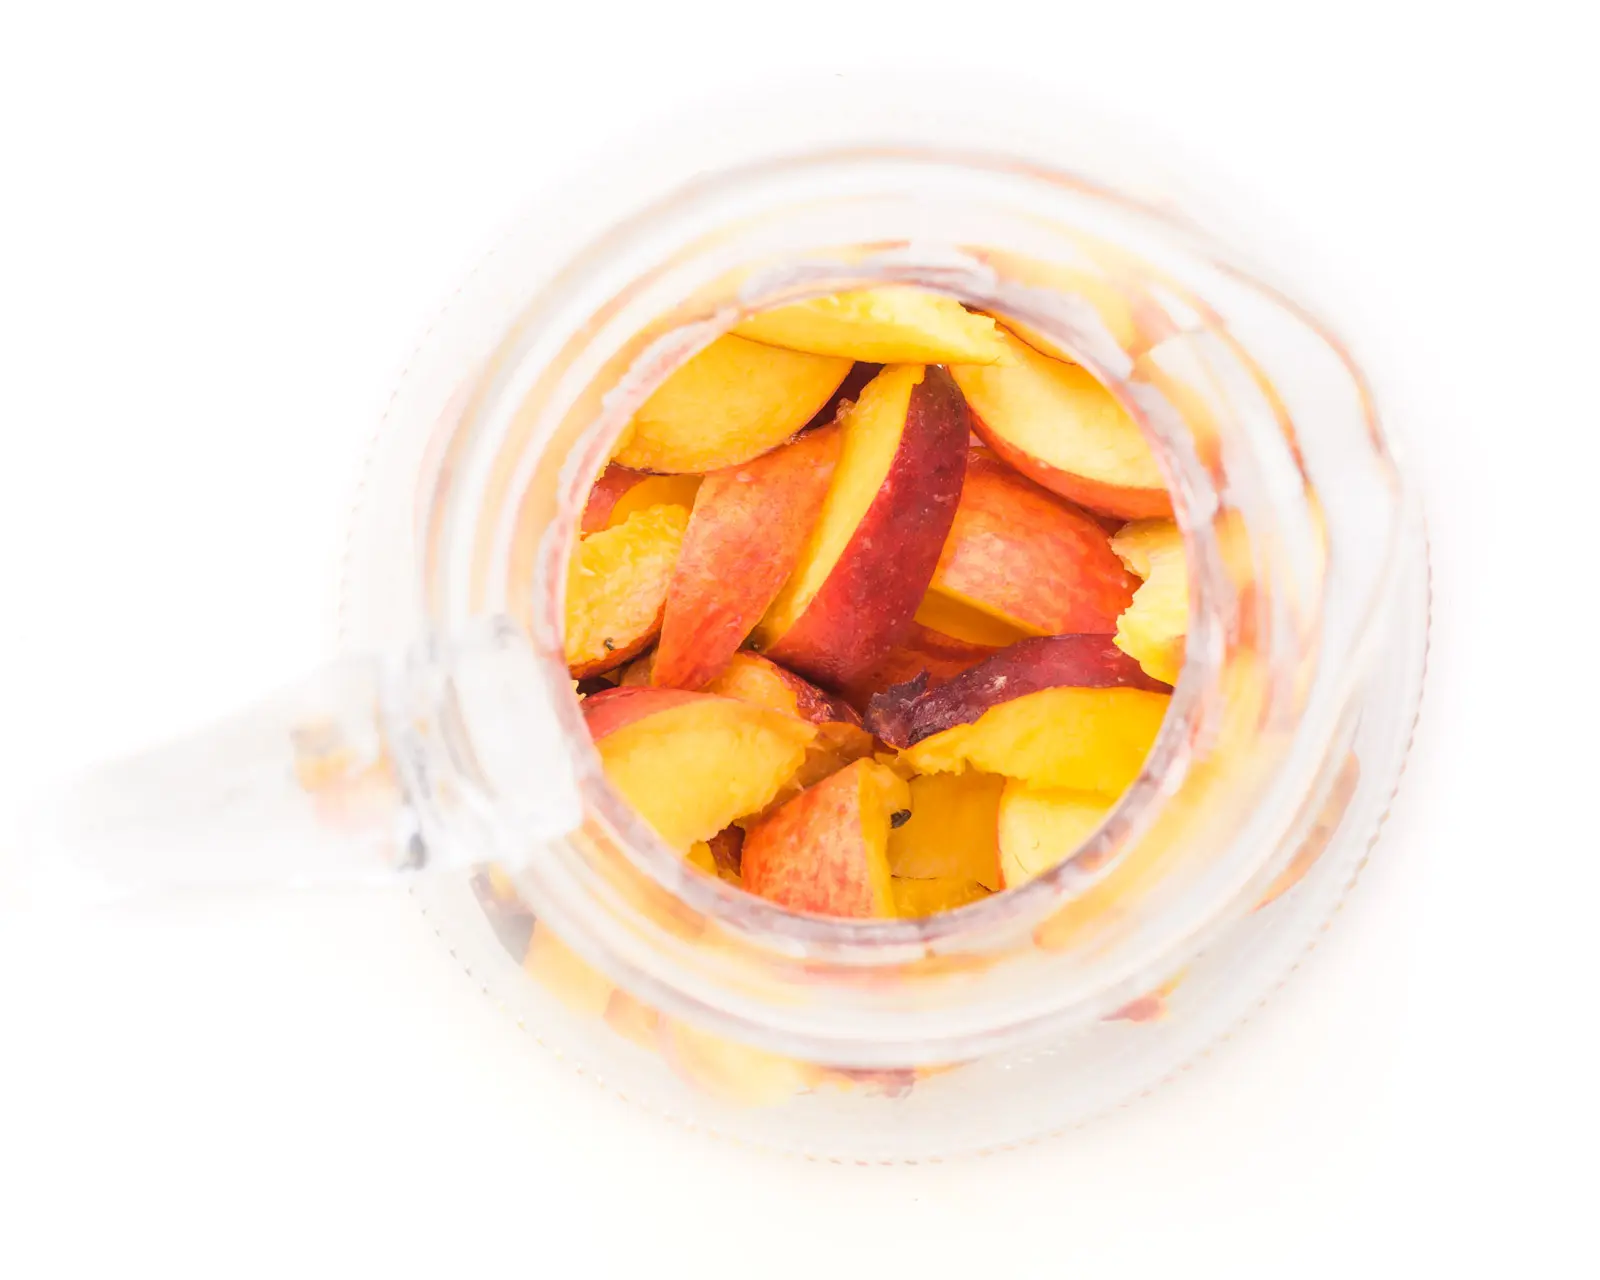 Looking gown on a pitcher full of sliced peaches.